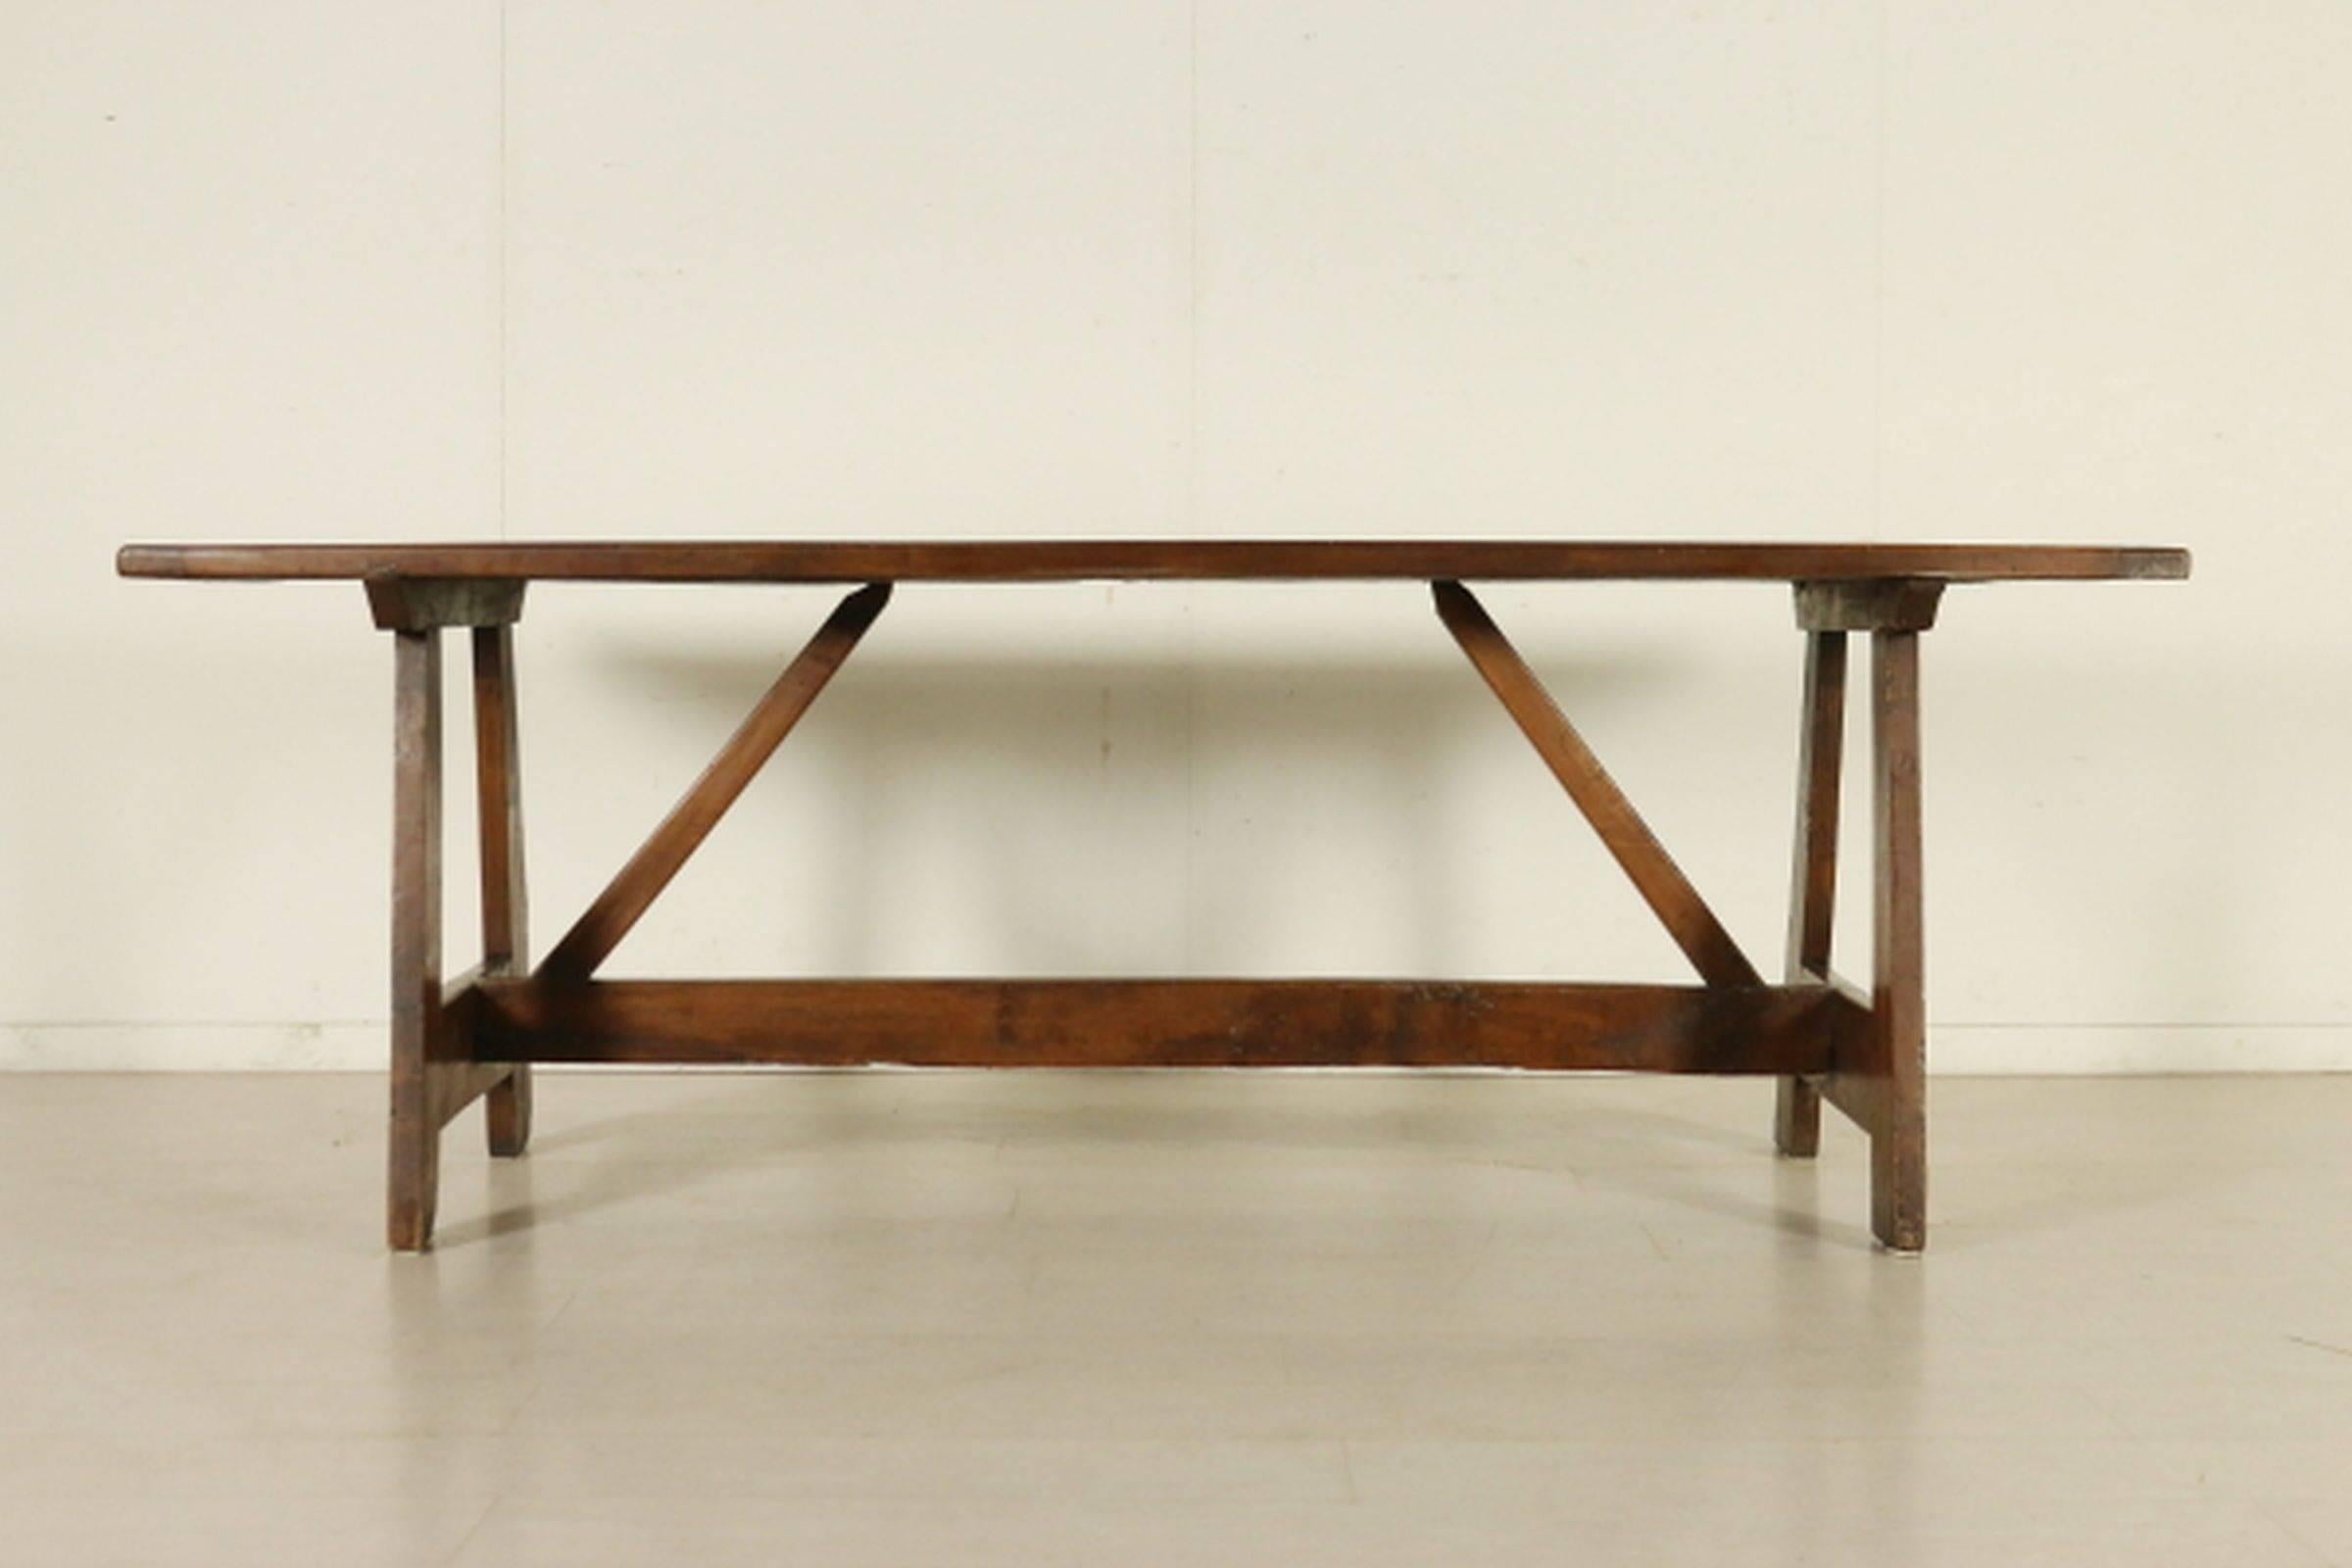 Rectangular walnut top raised on trestles joined by stretchers.